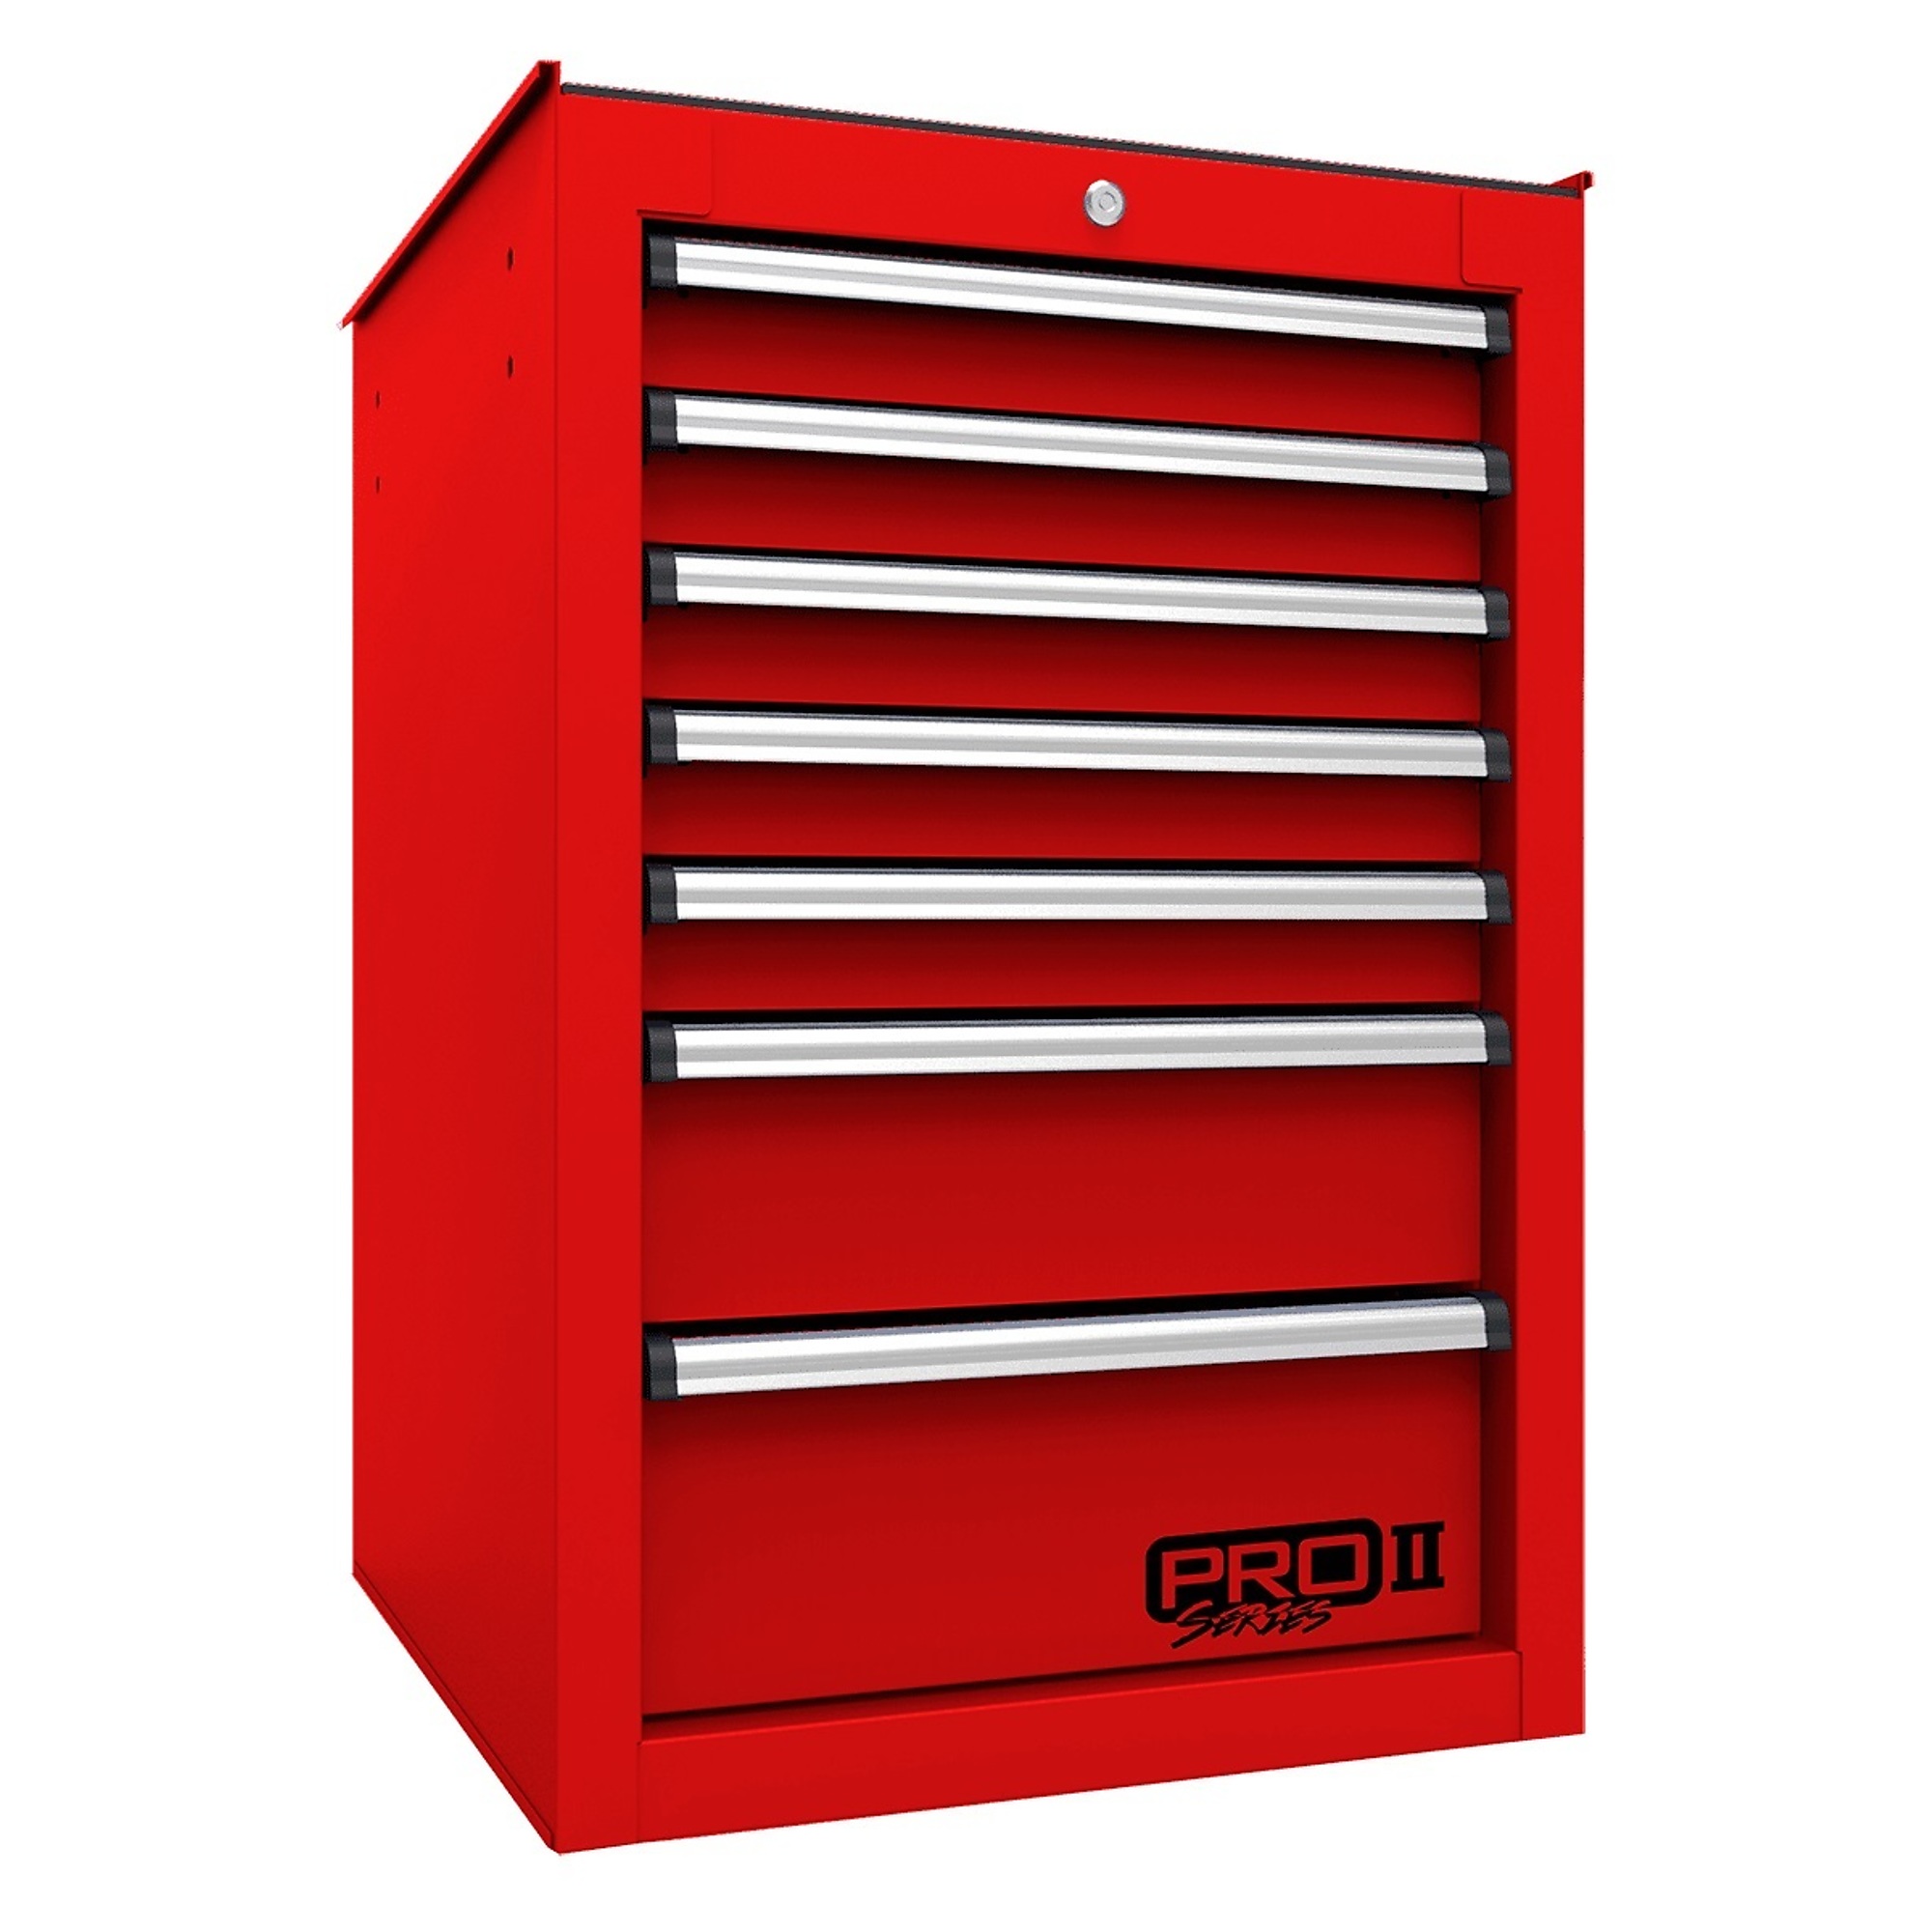 Homak 14Inch Pro 2 Series 7-Drawer Side Tool Cabinet, Red, 14.5Inch W x 24.5Inch D x 32.87Inch H., Model RD08014552